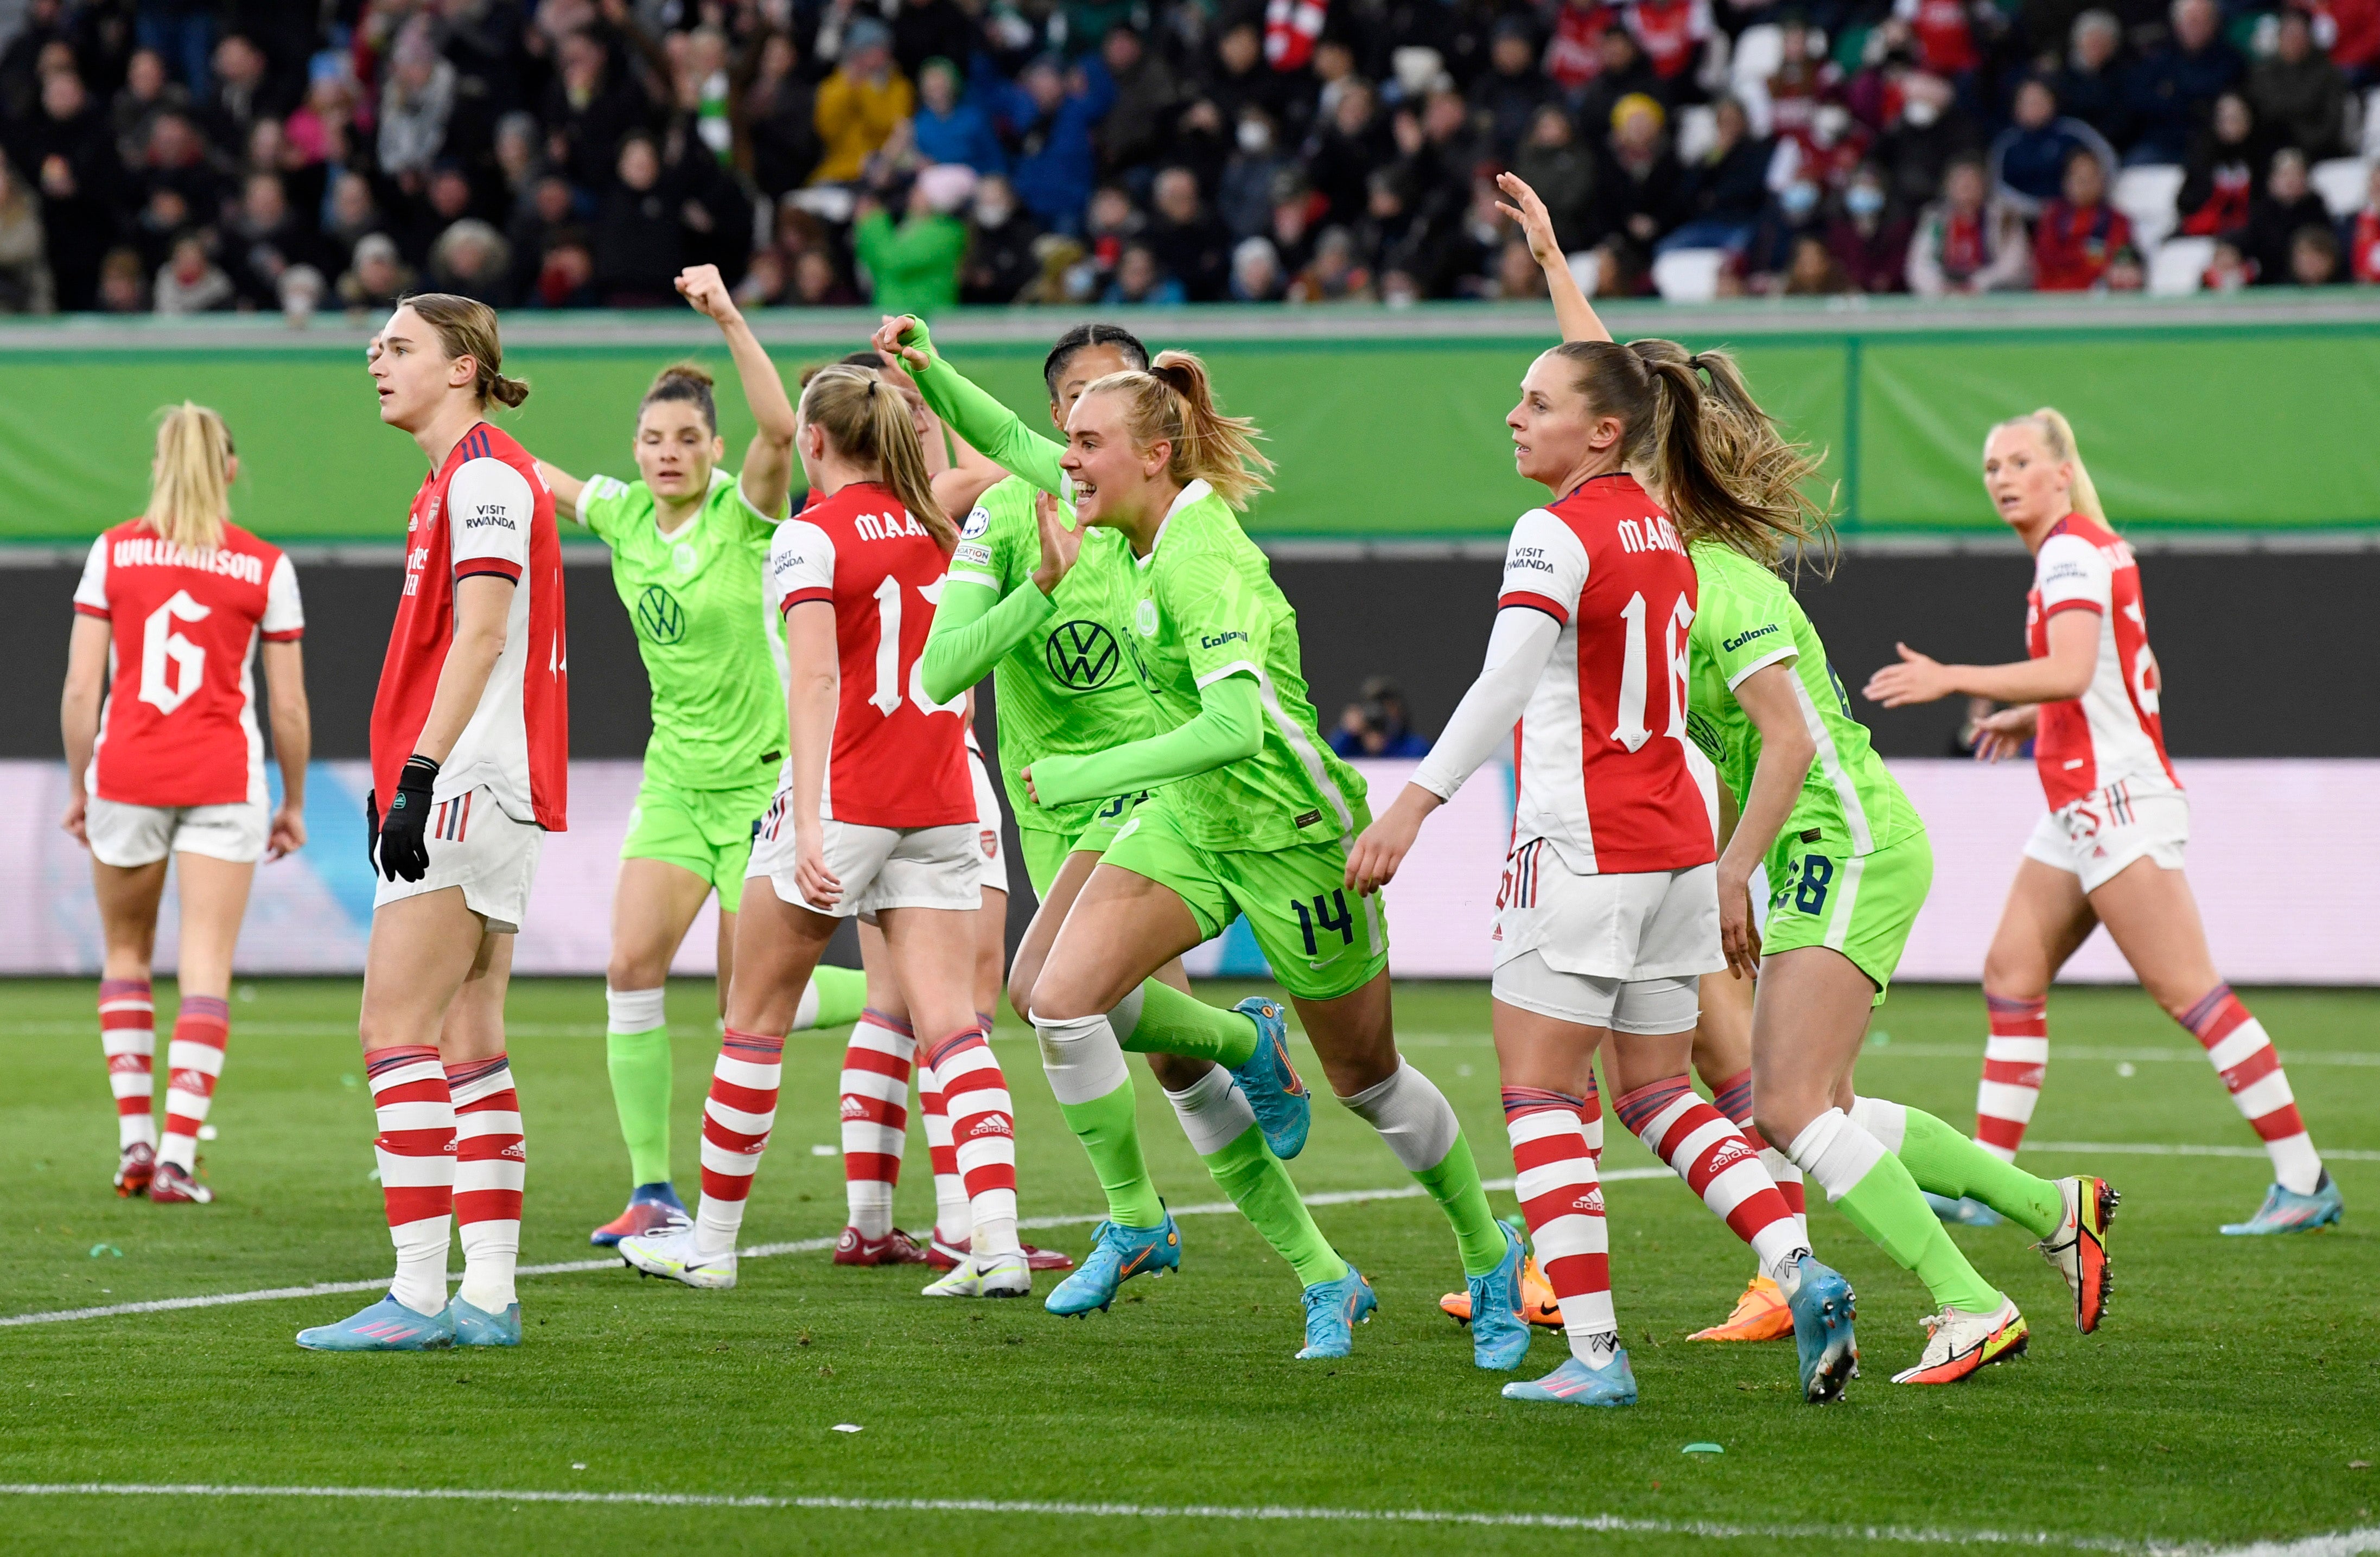 Arsenal and Wolfsburg do battle with a place in the Women’s Champions League semi-finals on the line